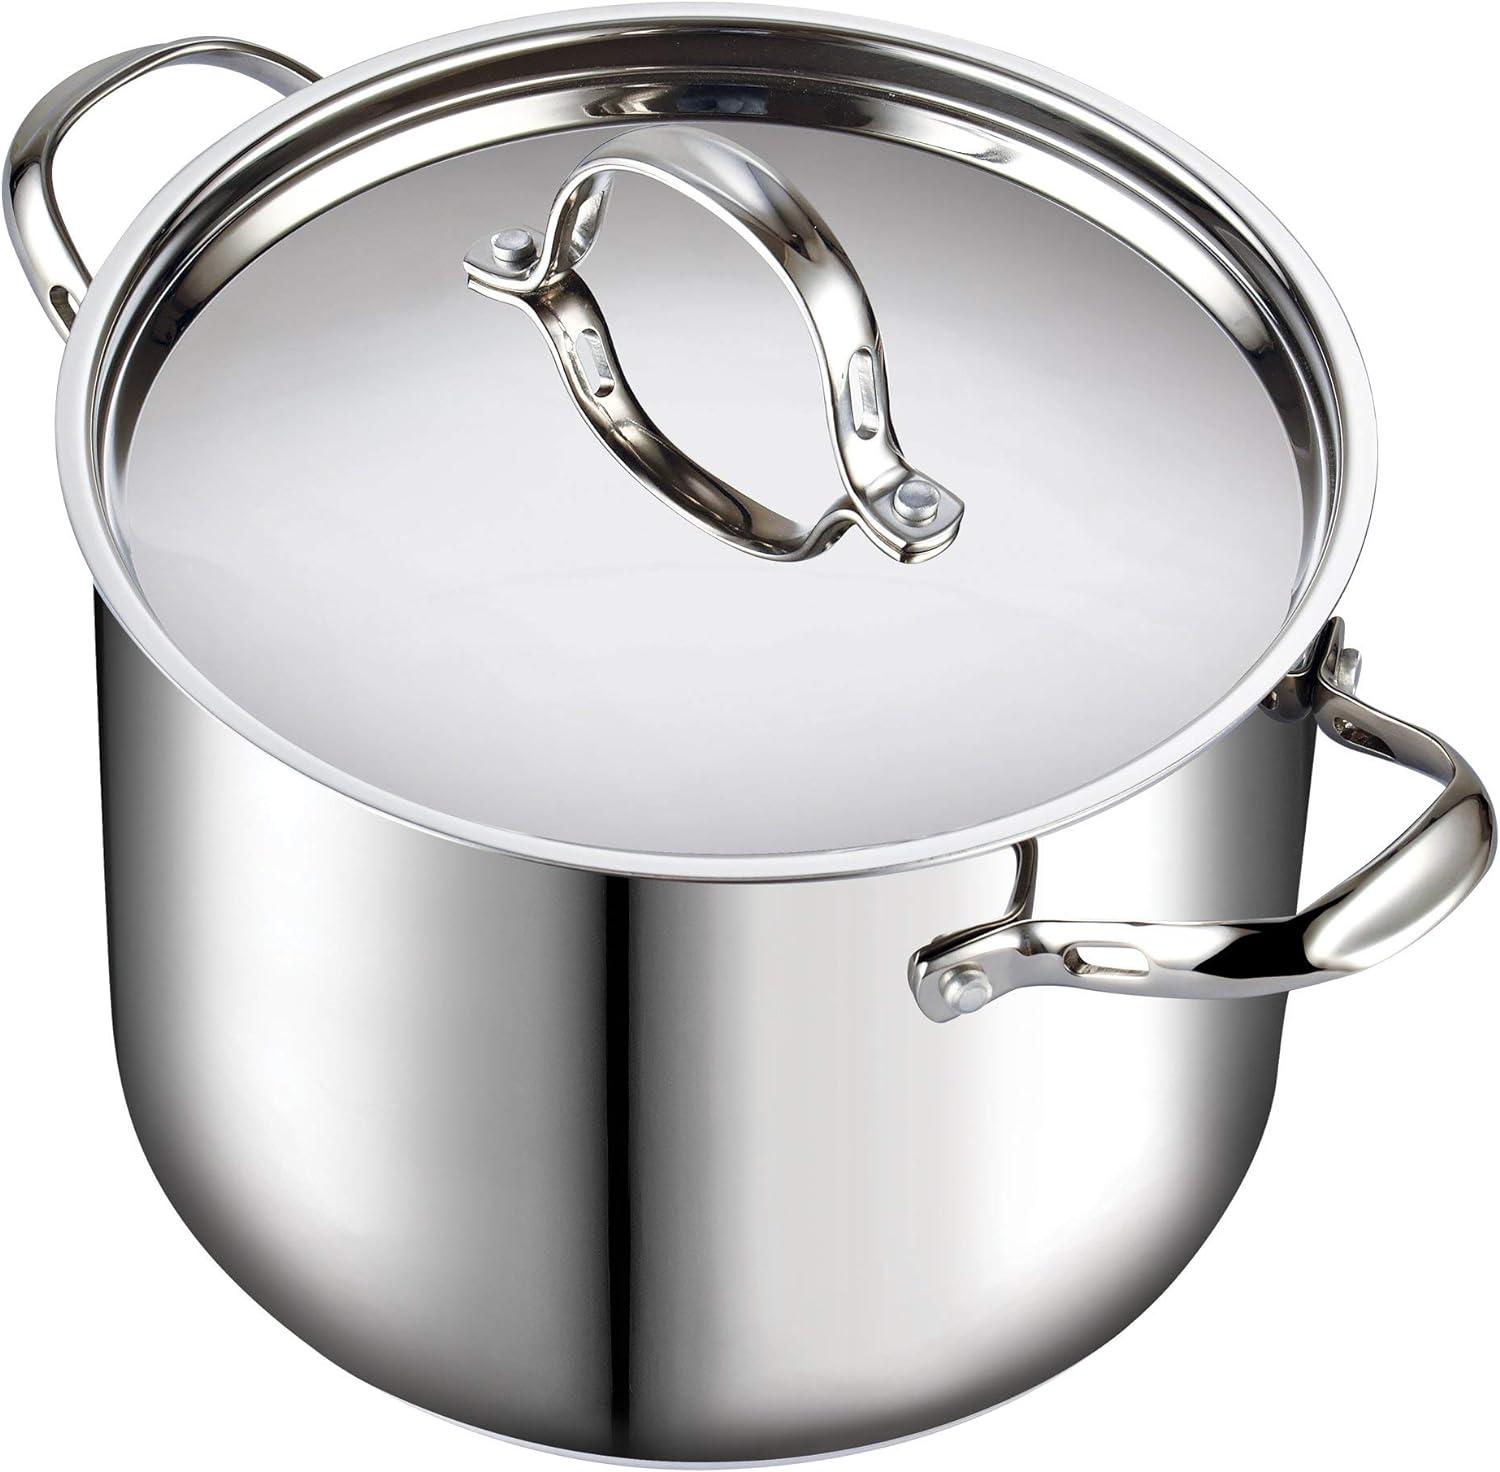 Cooks Standard 18/10 12qt Stainless Steel Stockpot for $37.82 Shipped